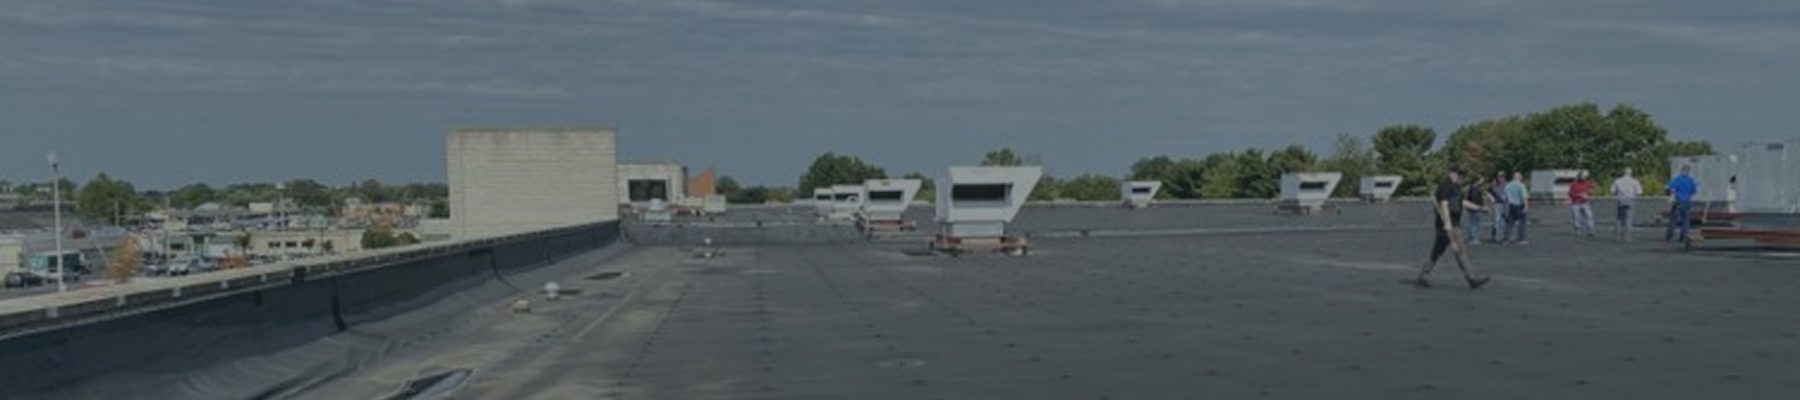 K-Mart Roof Replacement